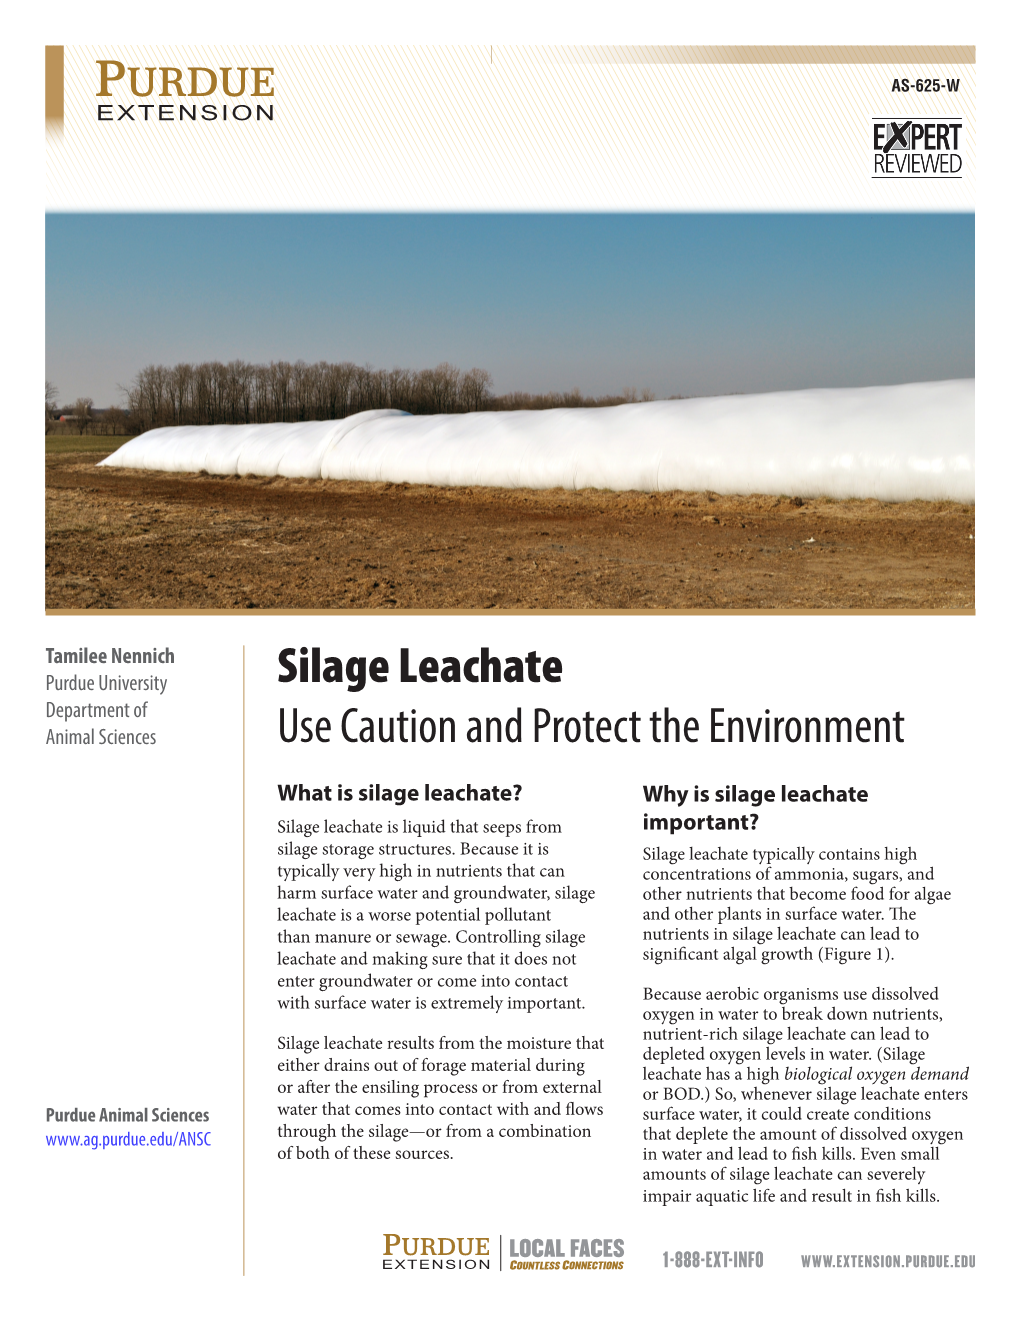 Silage Leachate Department of Animal Sciences Use Caution and Protect the Environment